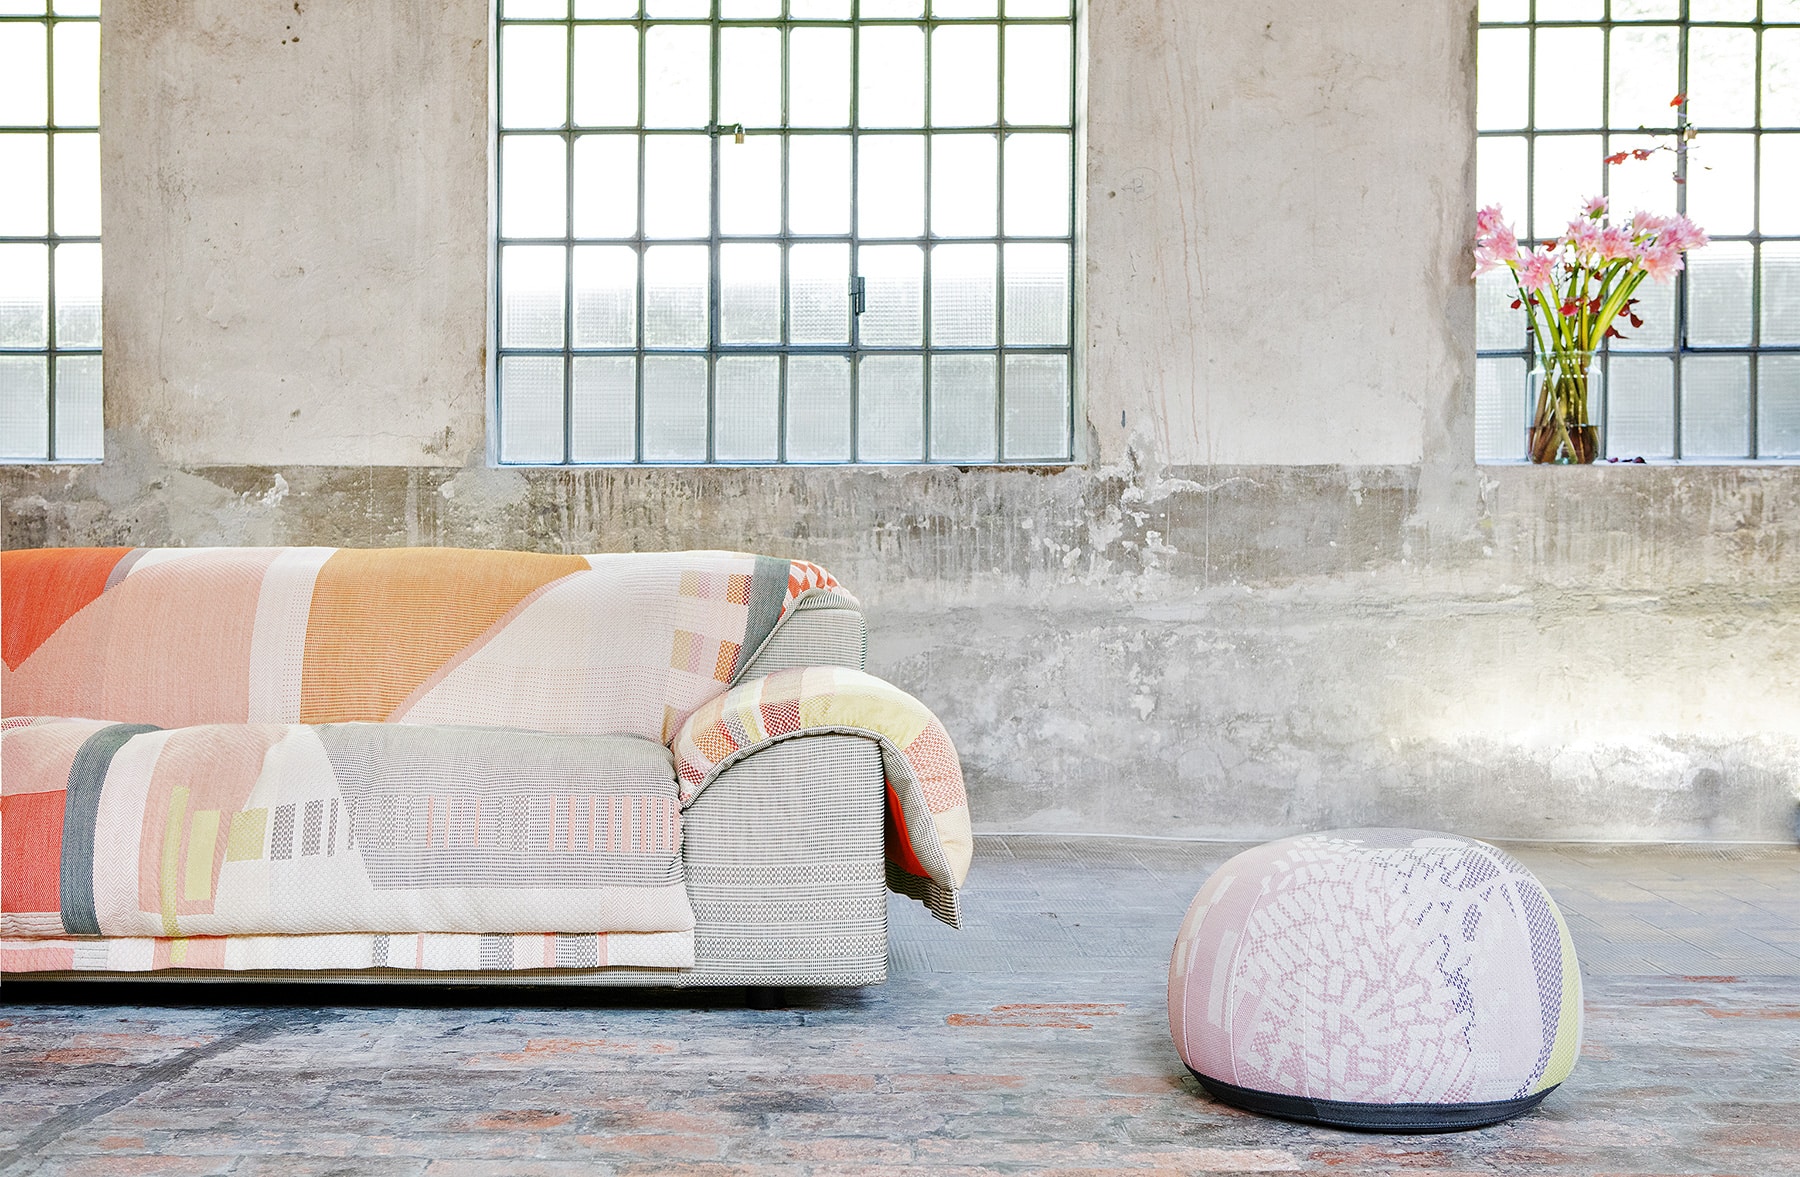 The Vlinder sofa and Bovist pouf in the Italian textile mill where their upholsteries are woven.